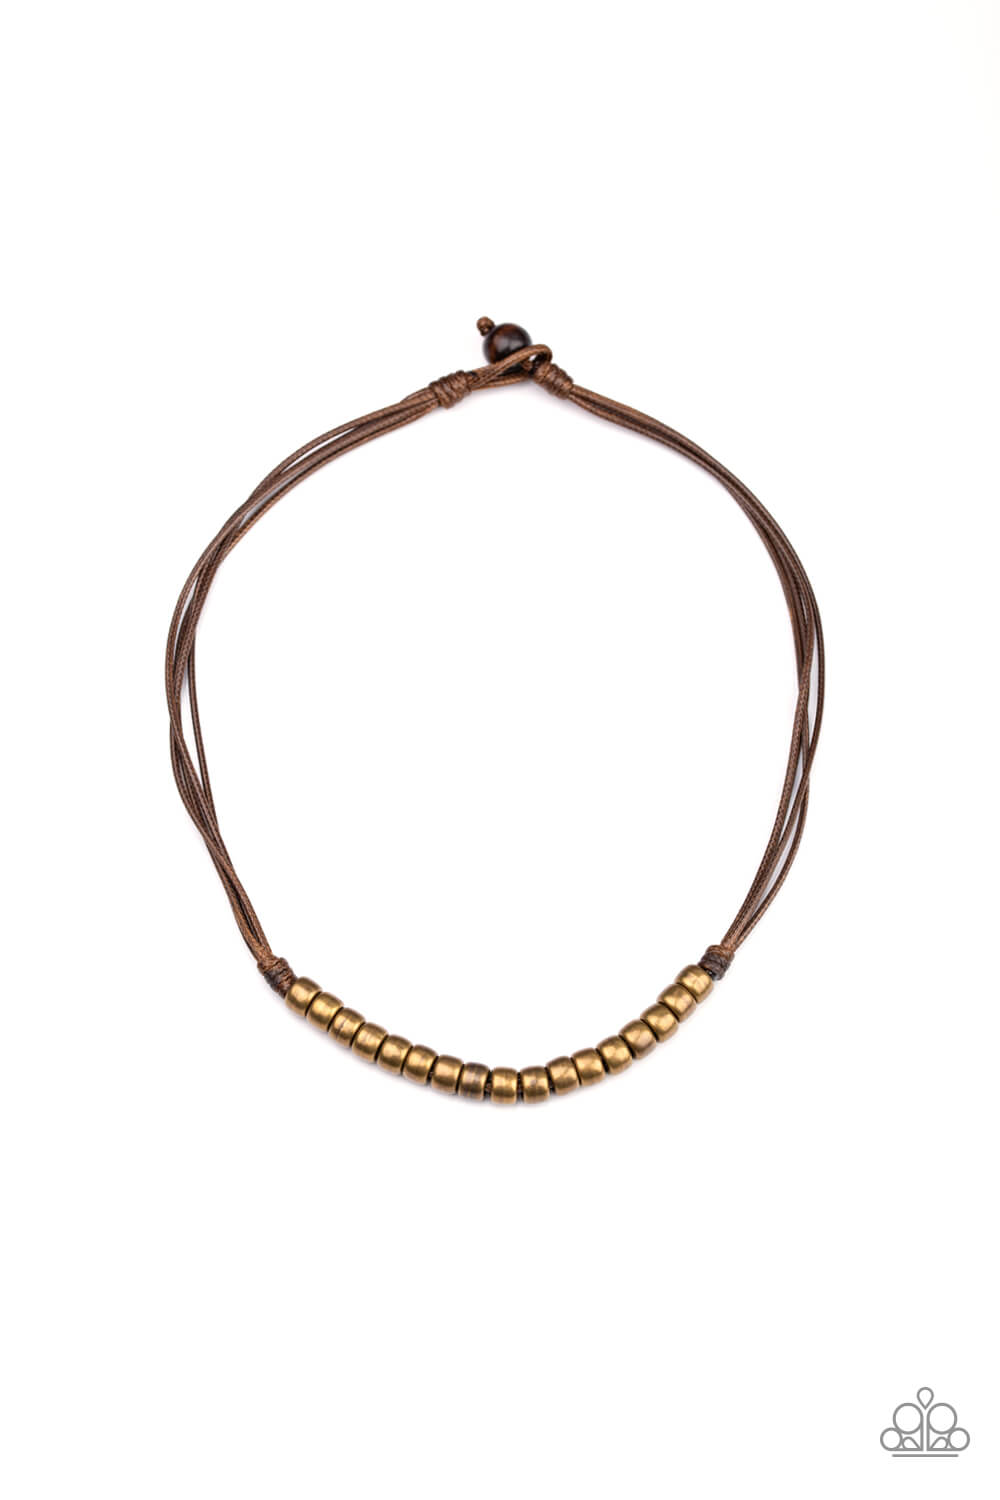 On The TREASURE Hunt - Brown Urban Necklace - Princess Glam Shop